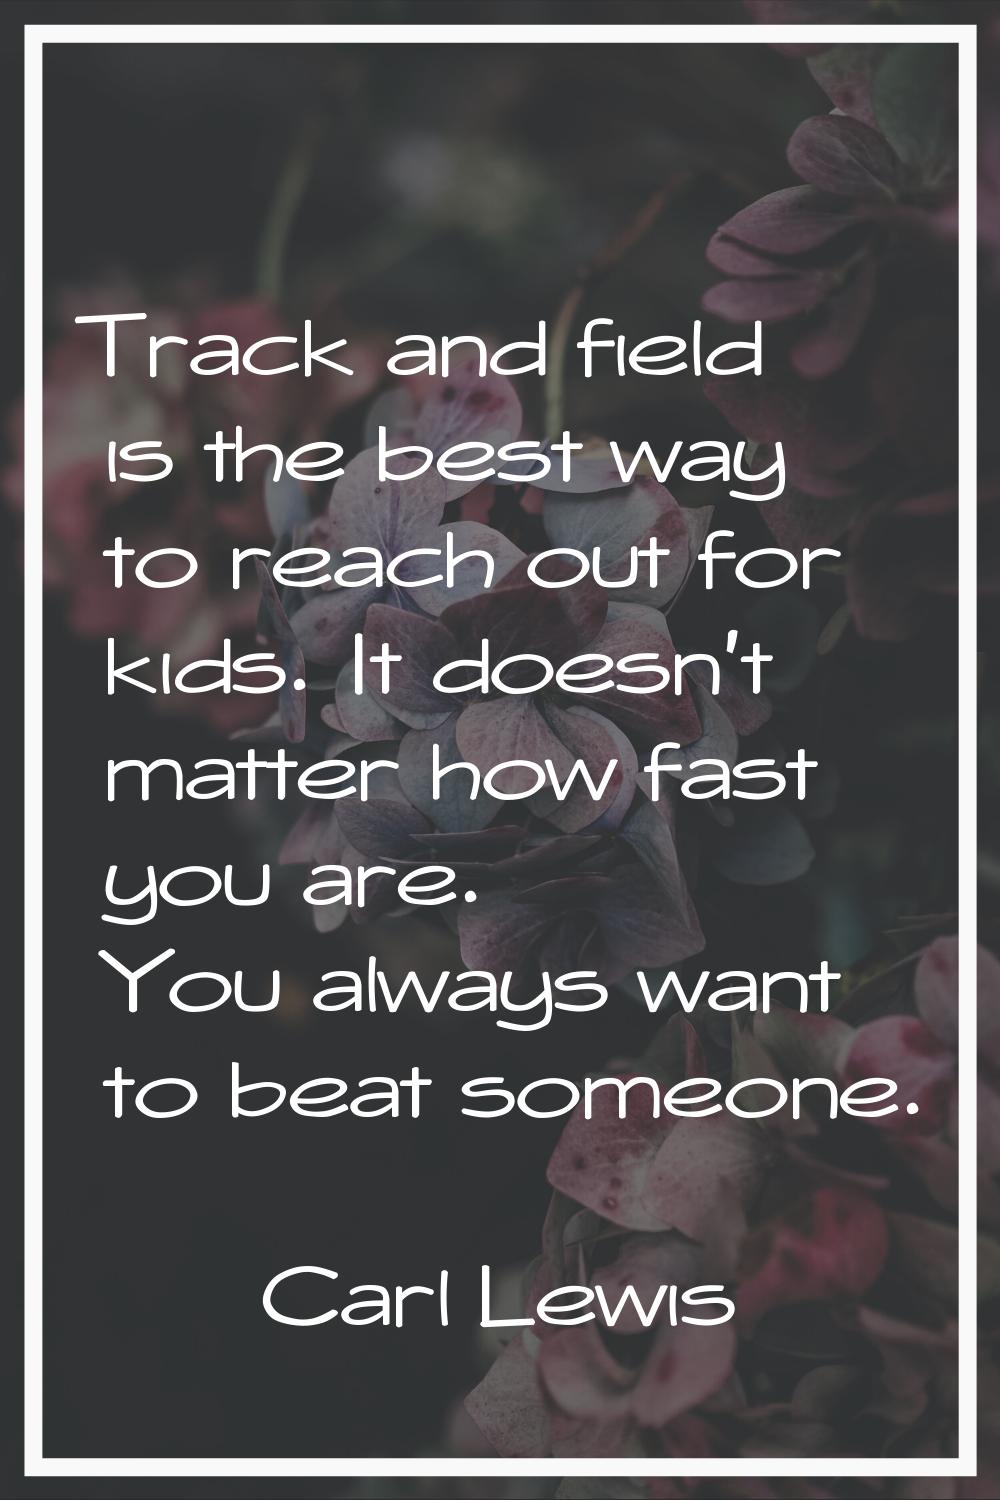 Track and field is the best way to reach out for kids. It doesn't matter how fast you are. You alwa